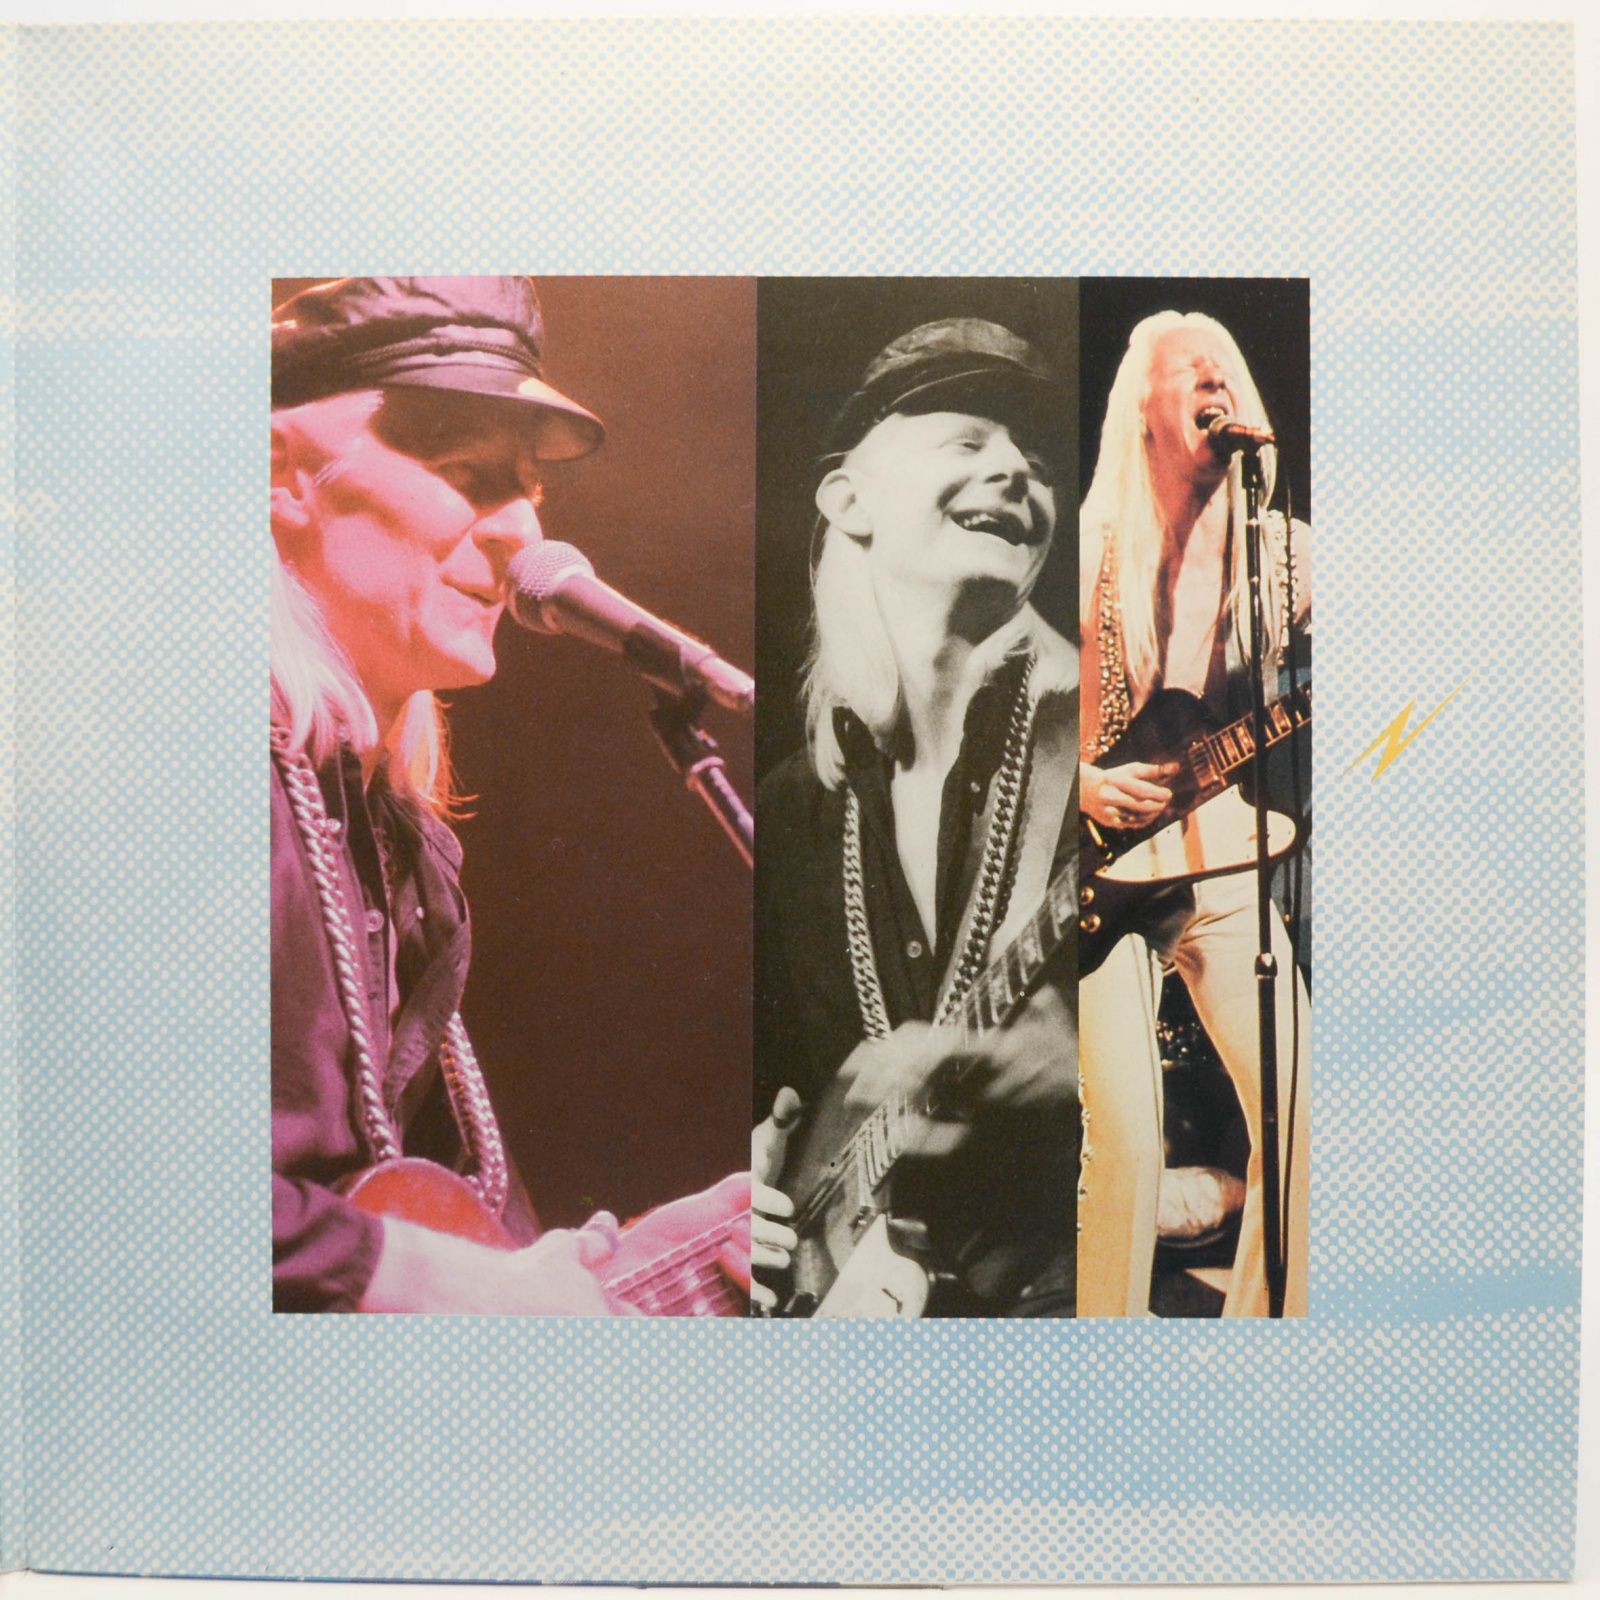 Johnny Winter — The Collection (2LP, UK), 1987